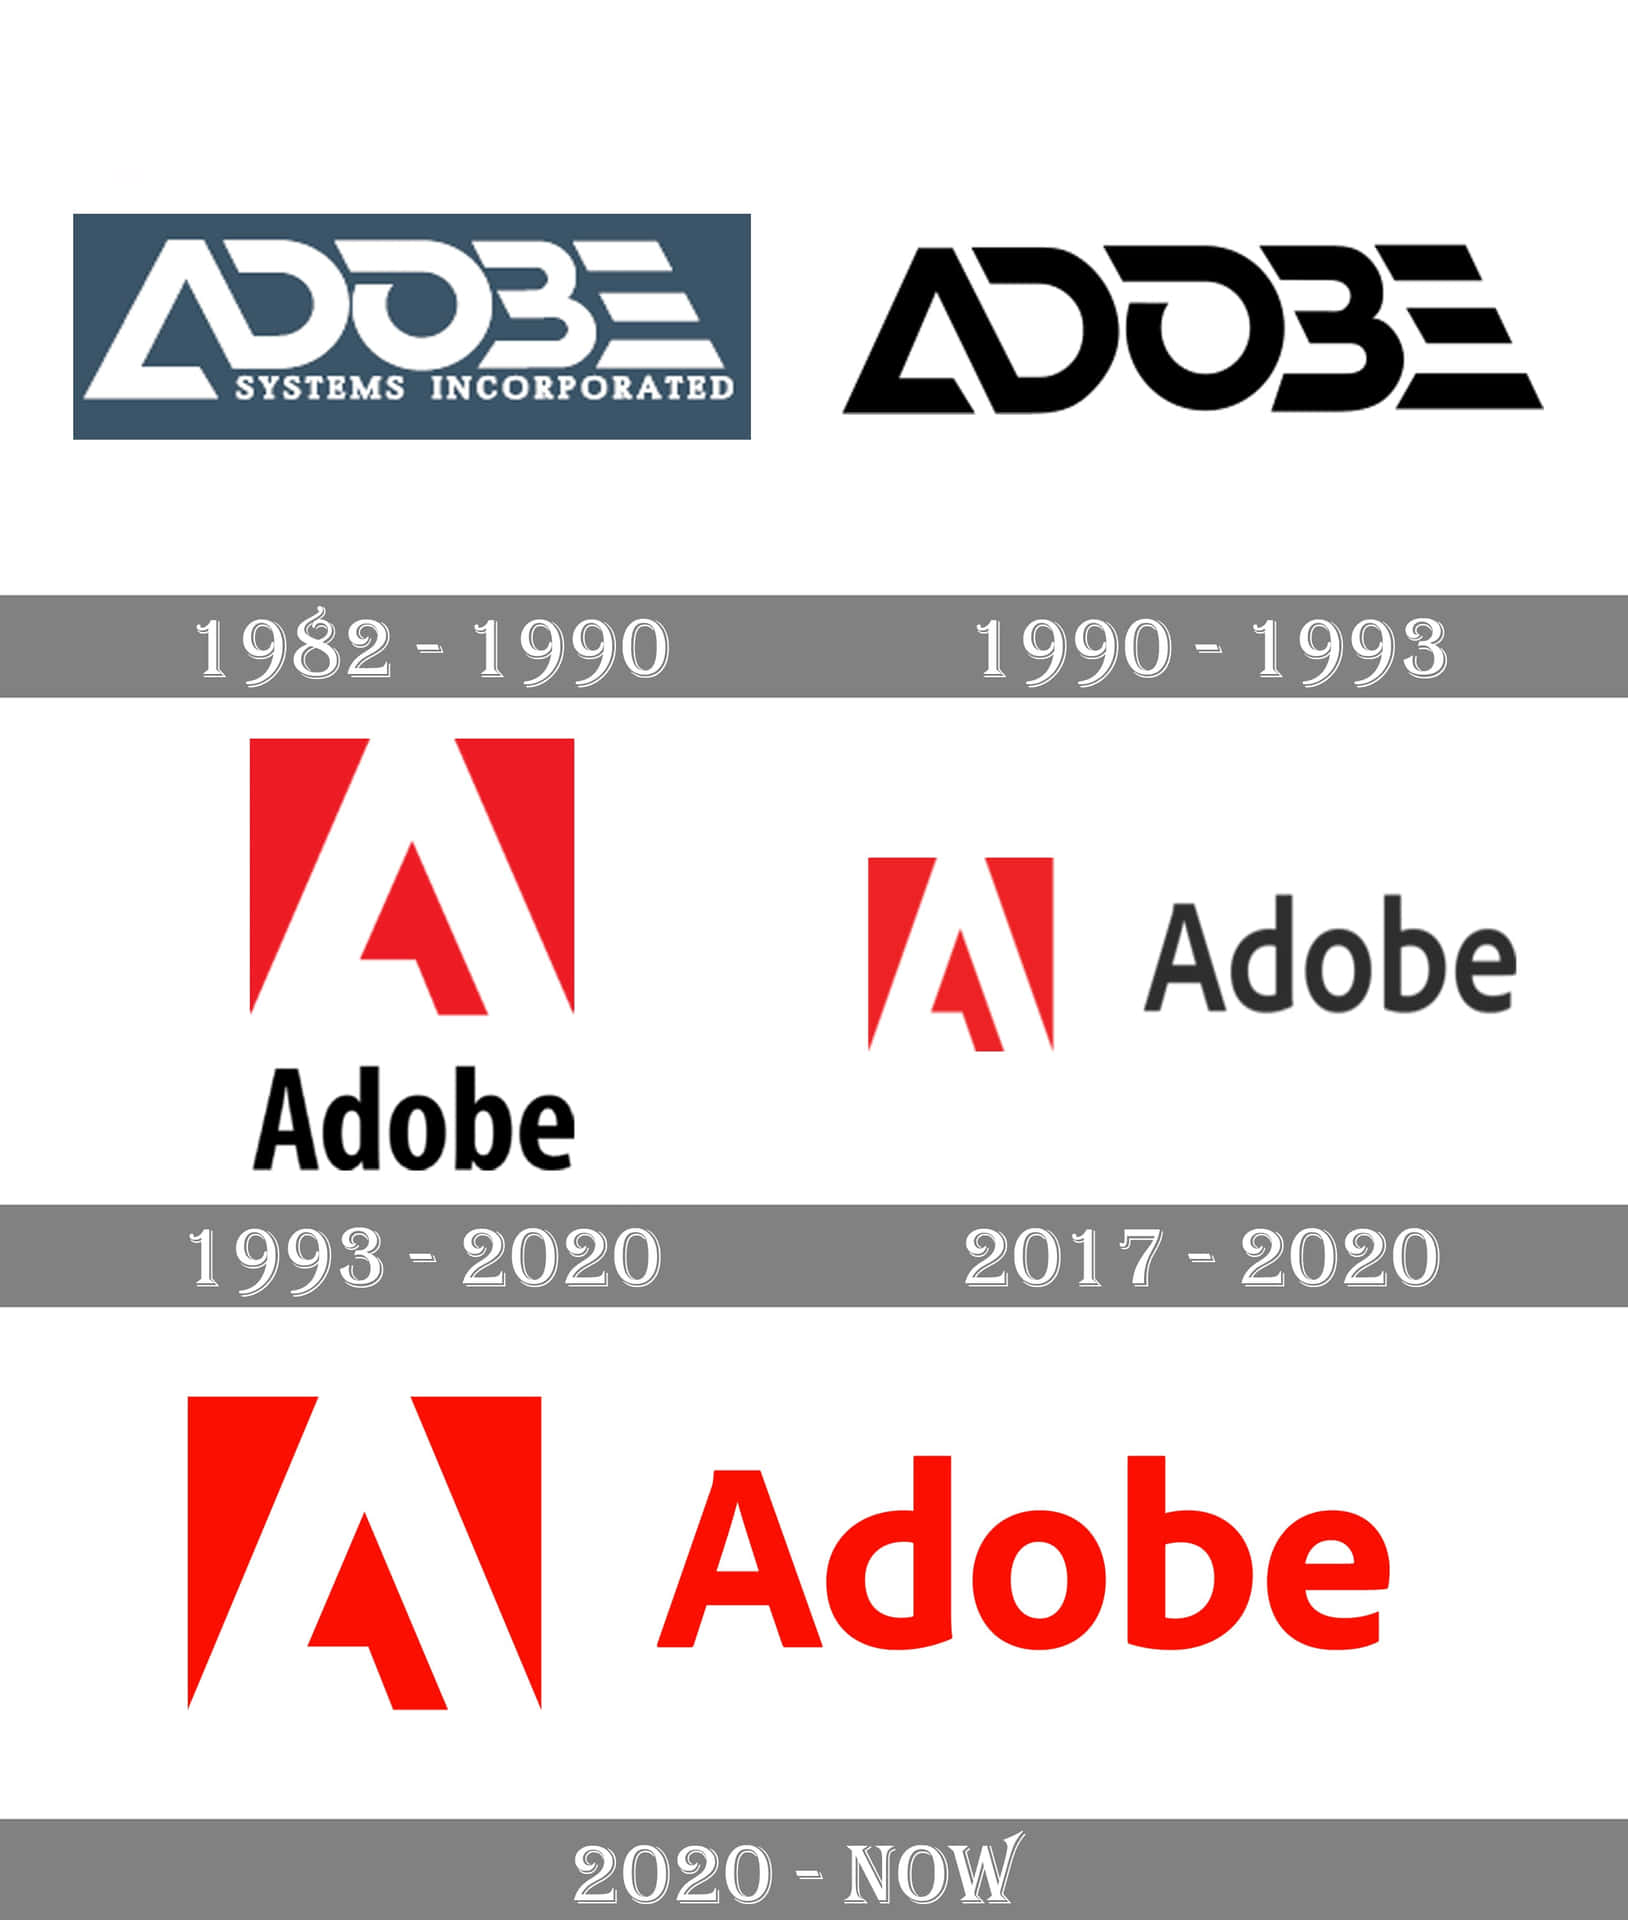 Adobe Logos From The Past To The Present